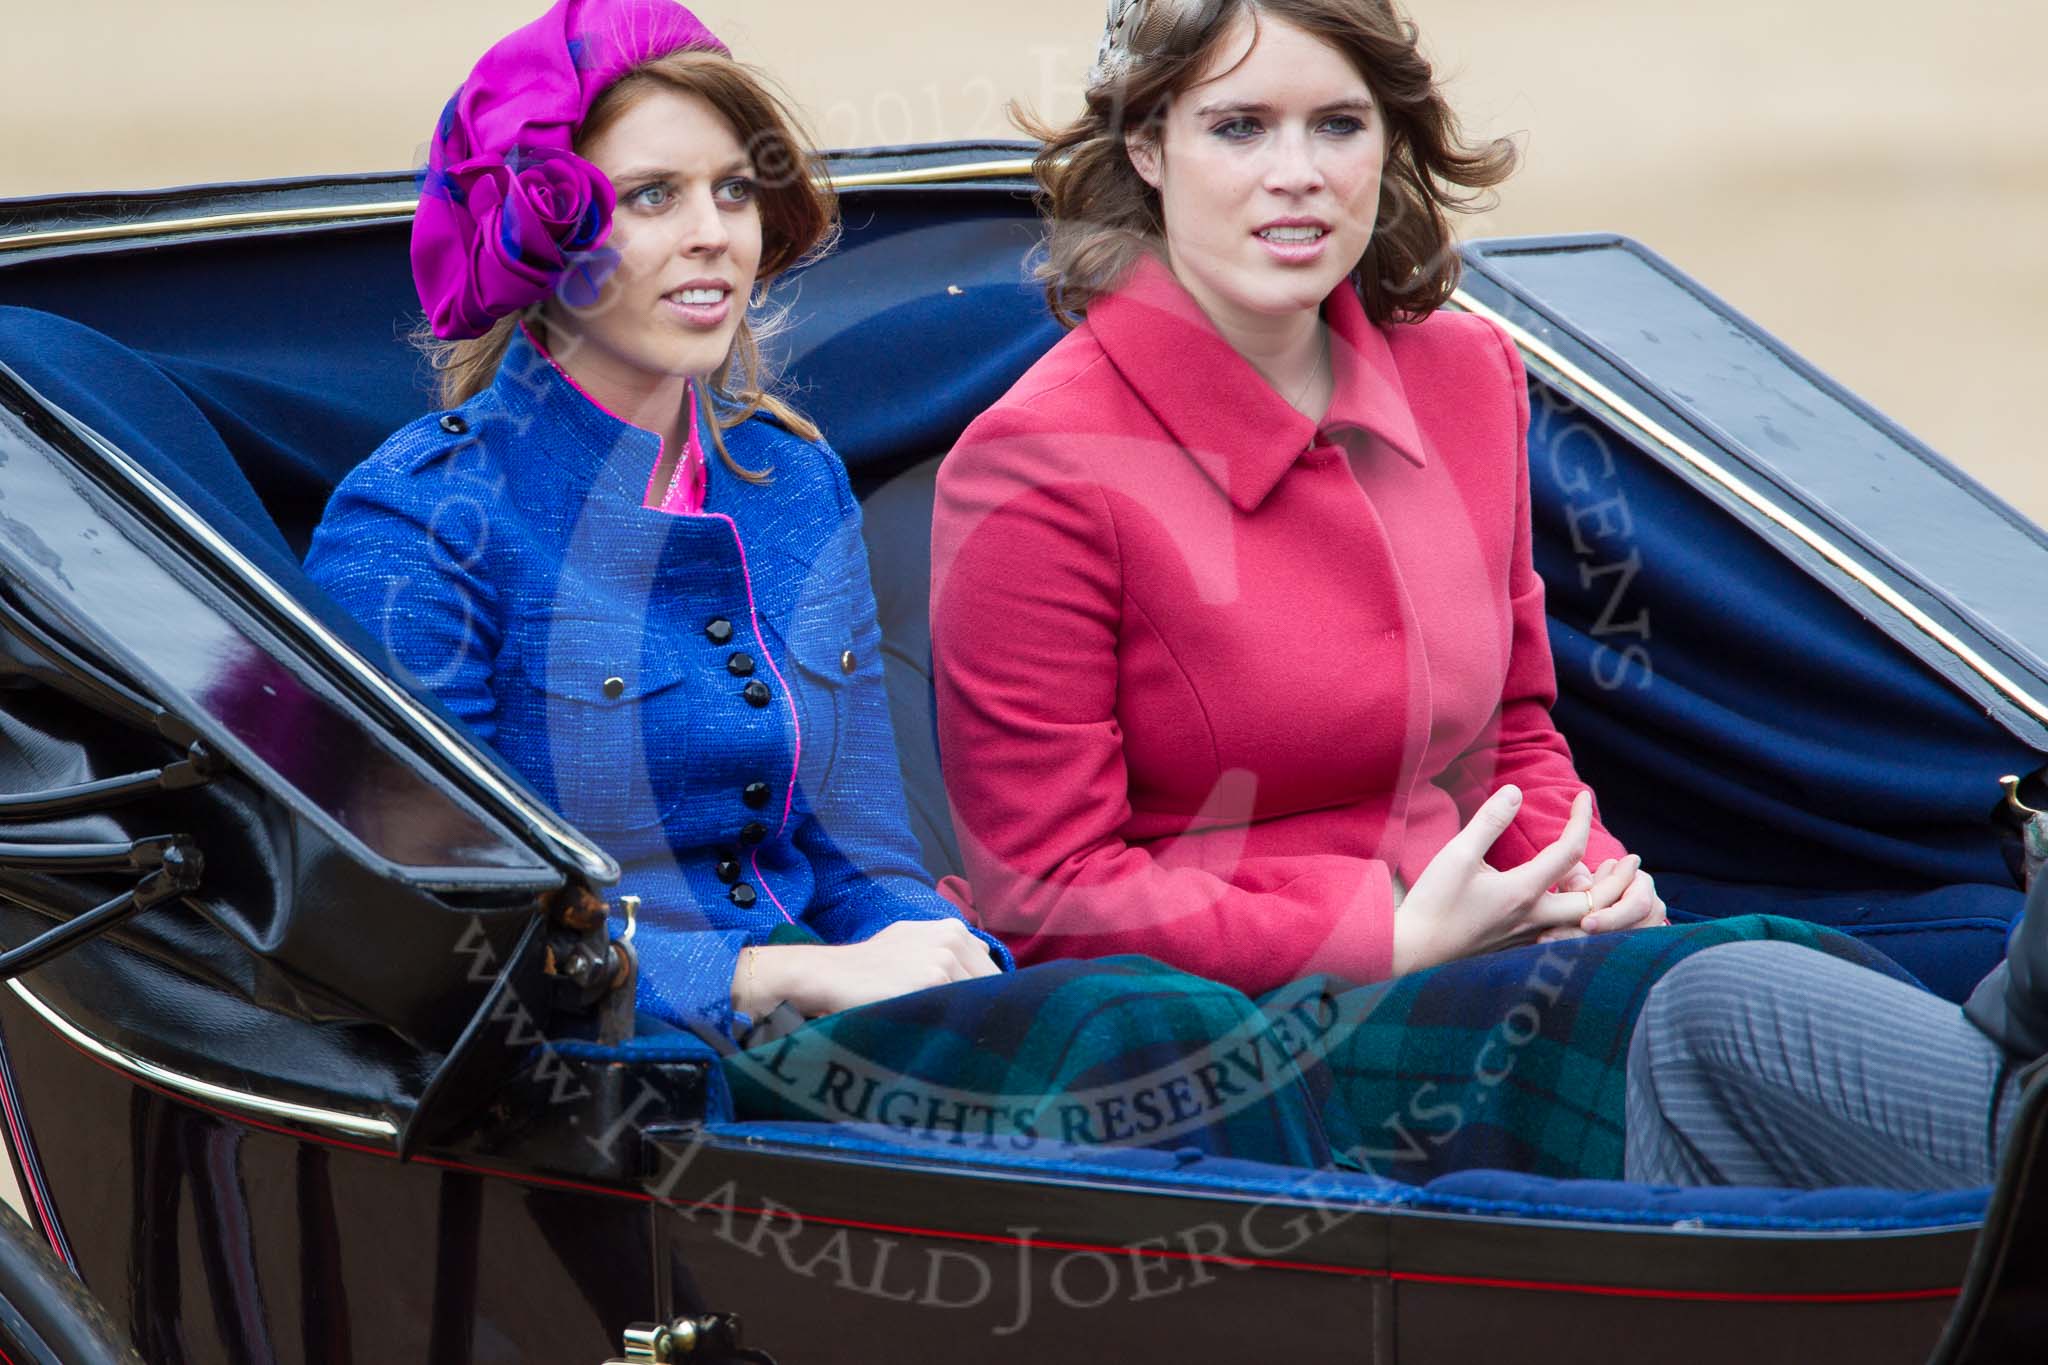 Trooping the Colour 2012: Princesses Beatrice and Eugenie of York in the second carriage..
Horse Guards Parade, Westminster,
London SW1,

United Kingdom,
on 16 June 2012 at 10:51, image #128